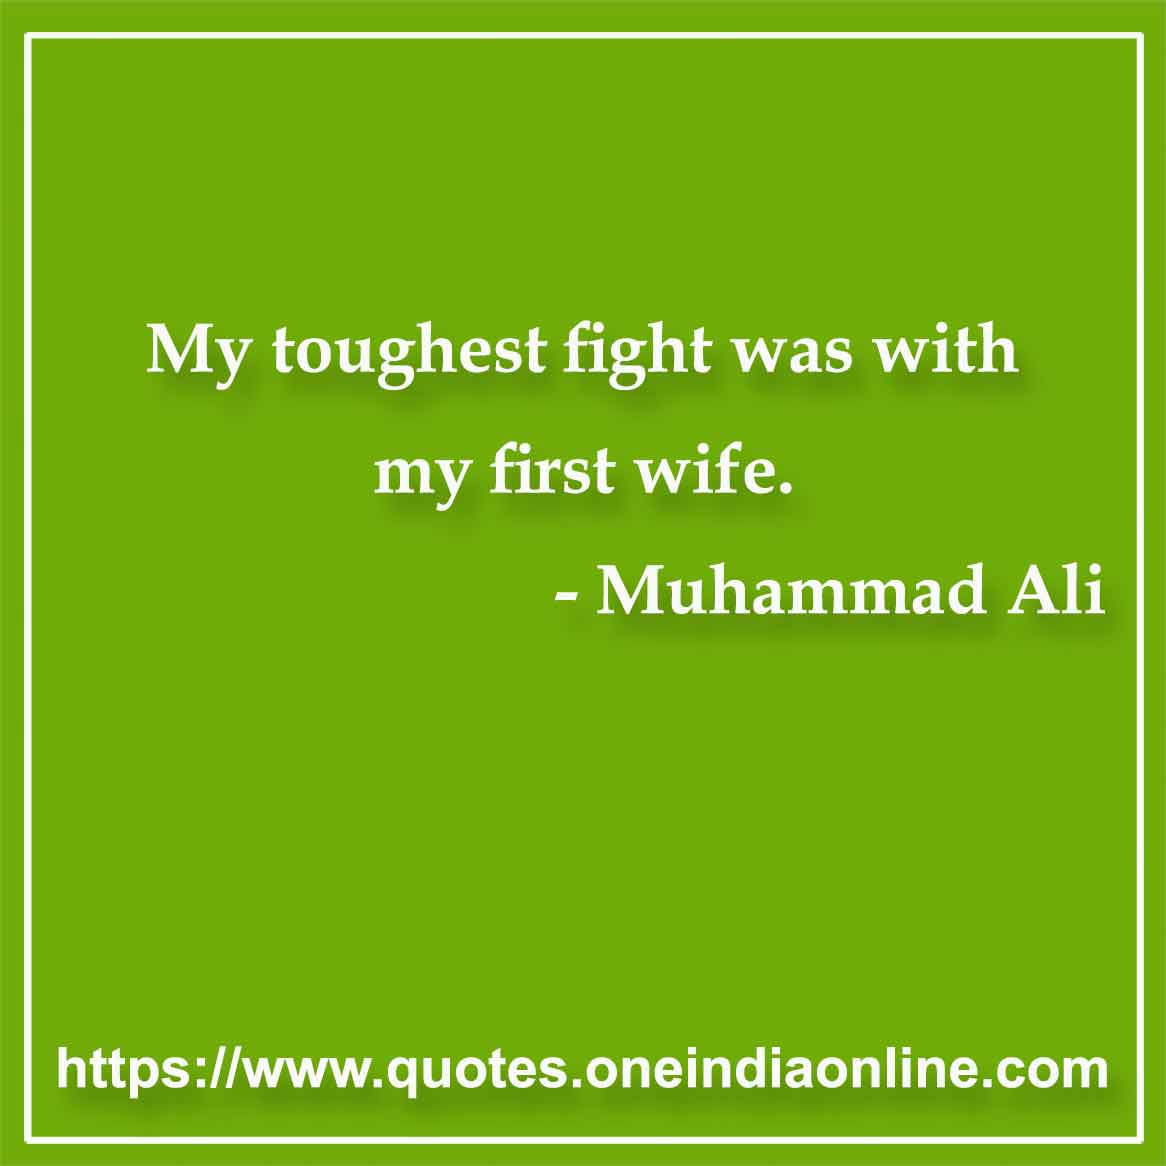 My toughest fight was with my first wife.

- Marriage Quotes by Muhammad Ali